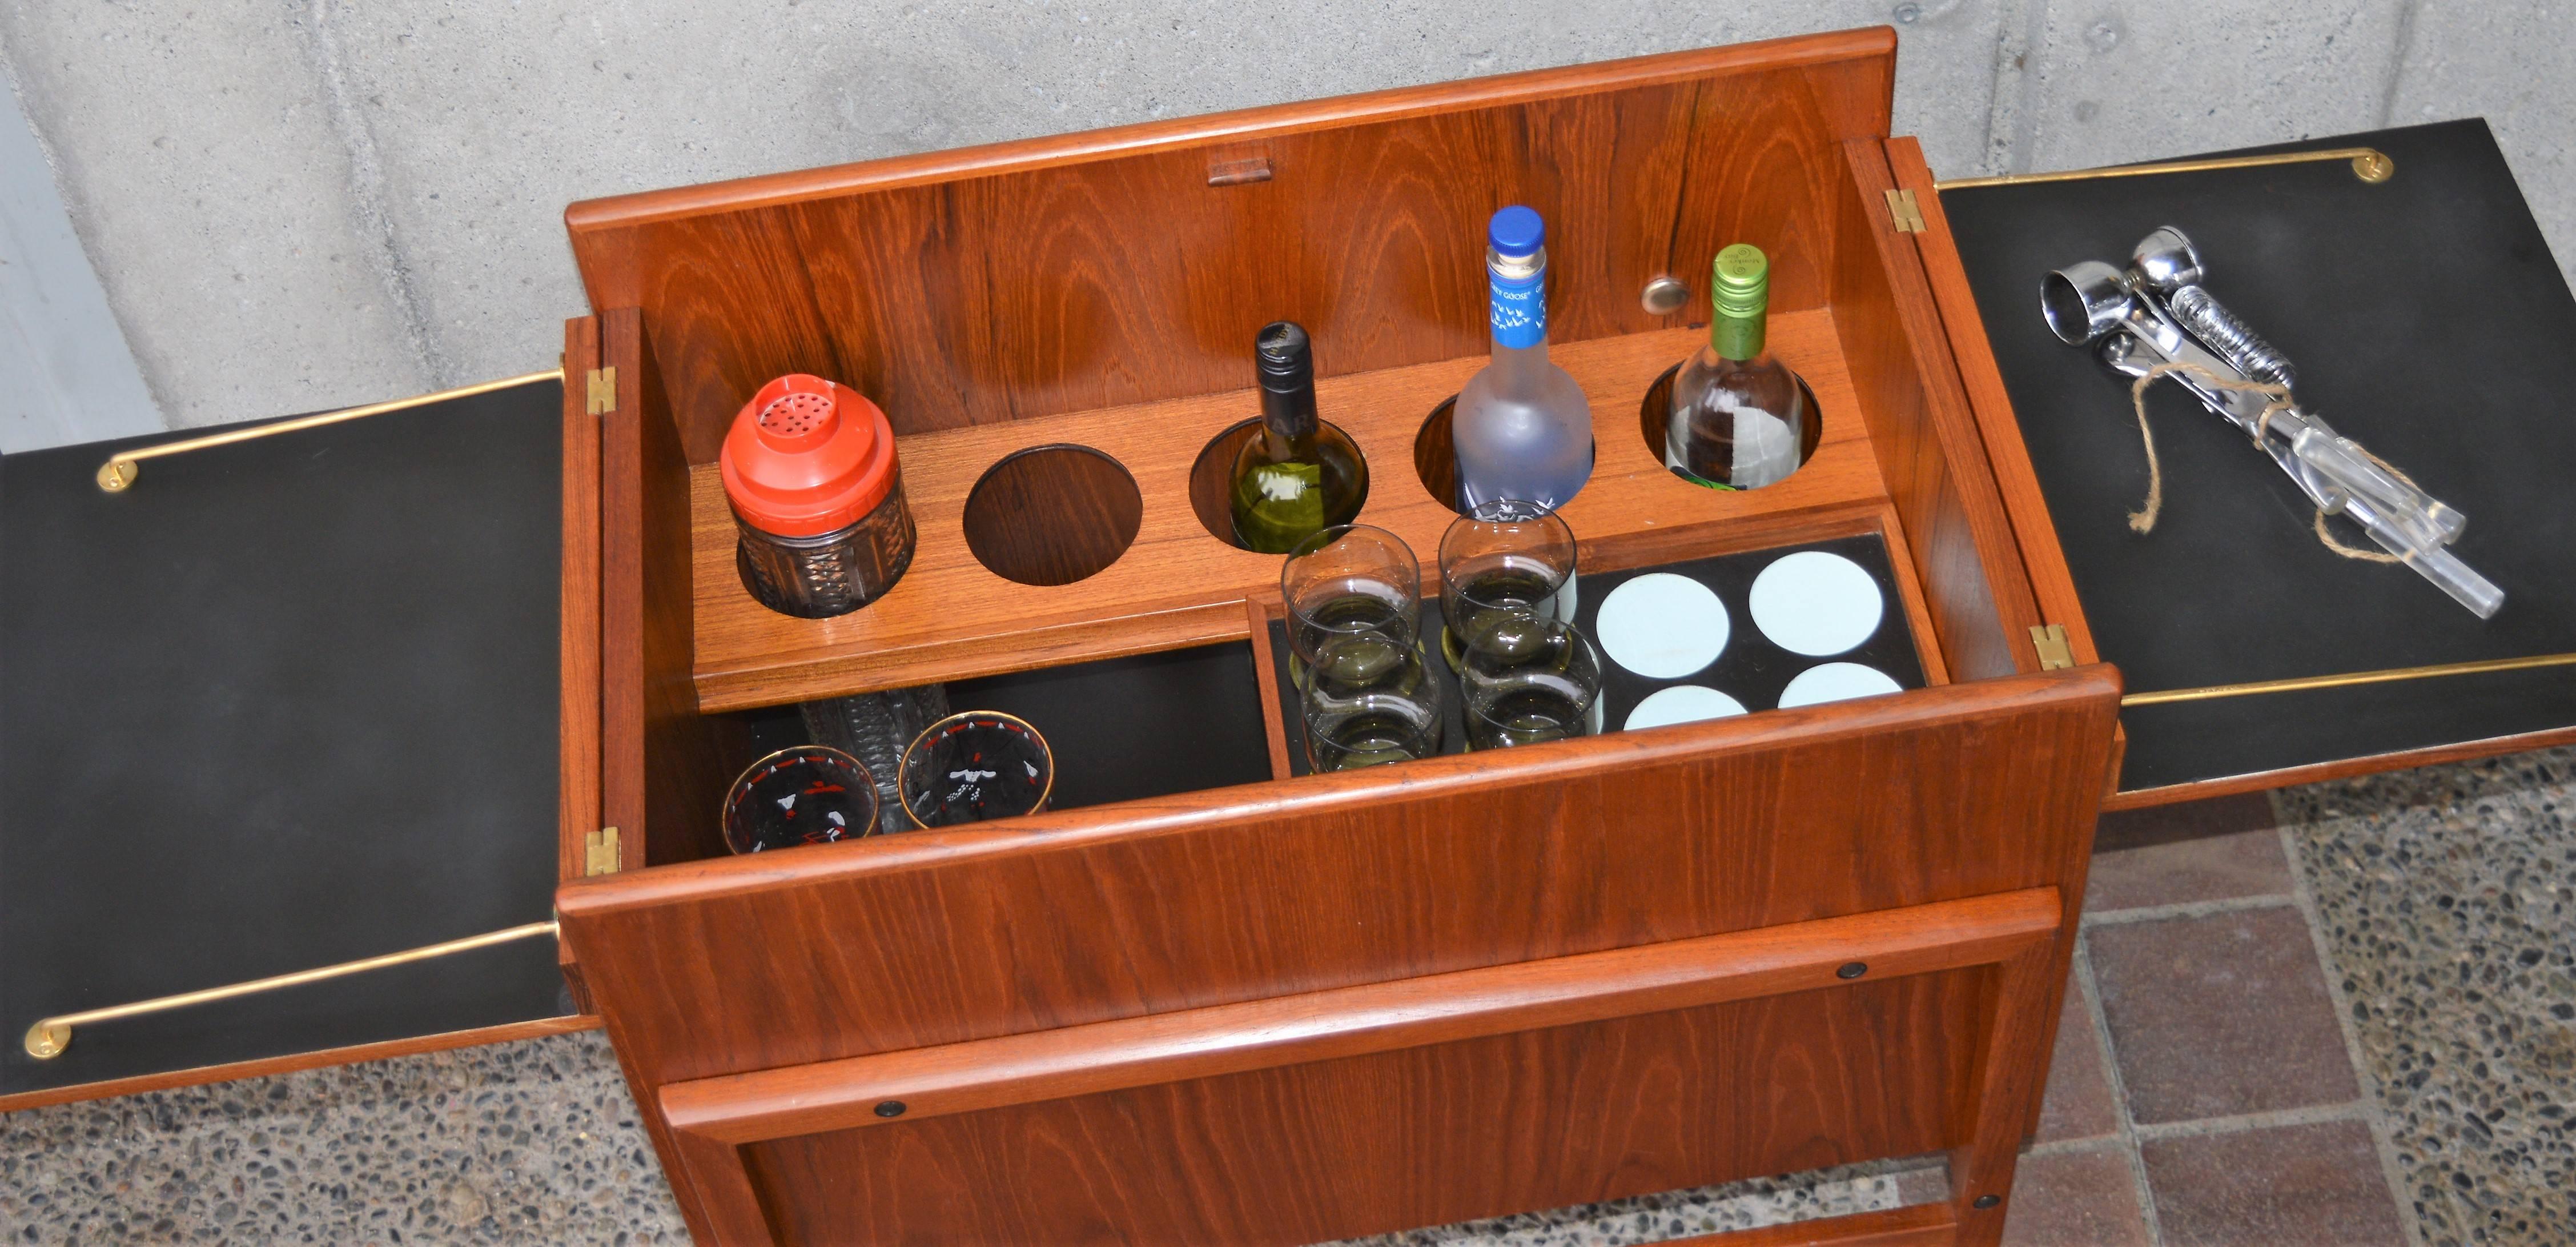 This lovely quality Danish modern teak bar cabinet / cart gives you so much more bang for your buck than the standard two tier bar cart, as it can house a pretty significant home bar. Opening the two top doors and dropping them down, exposes black